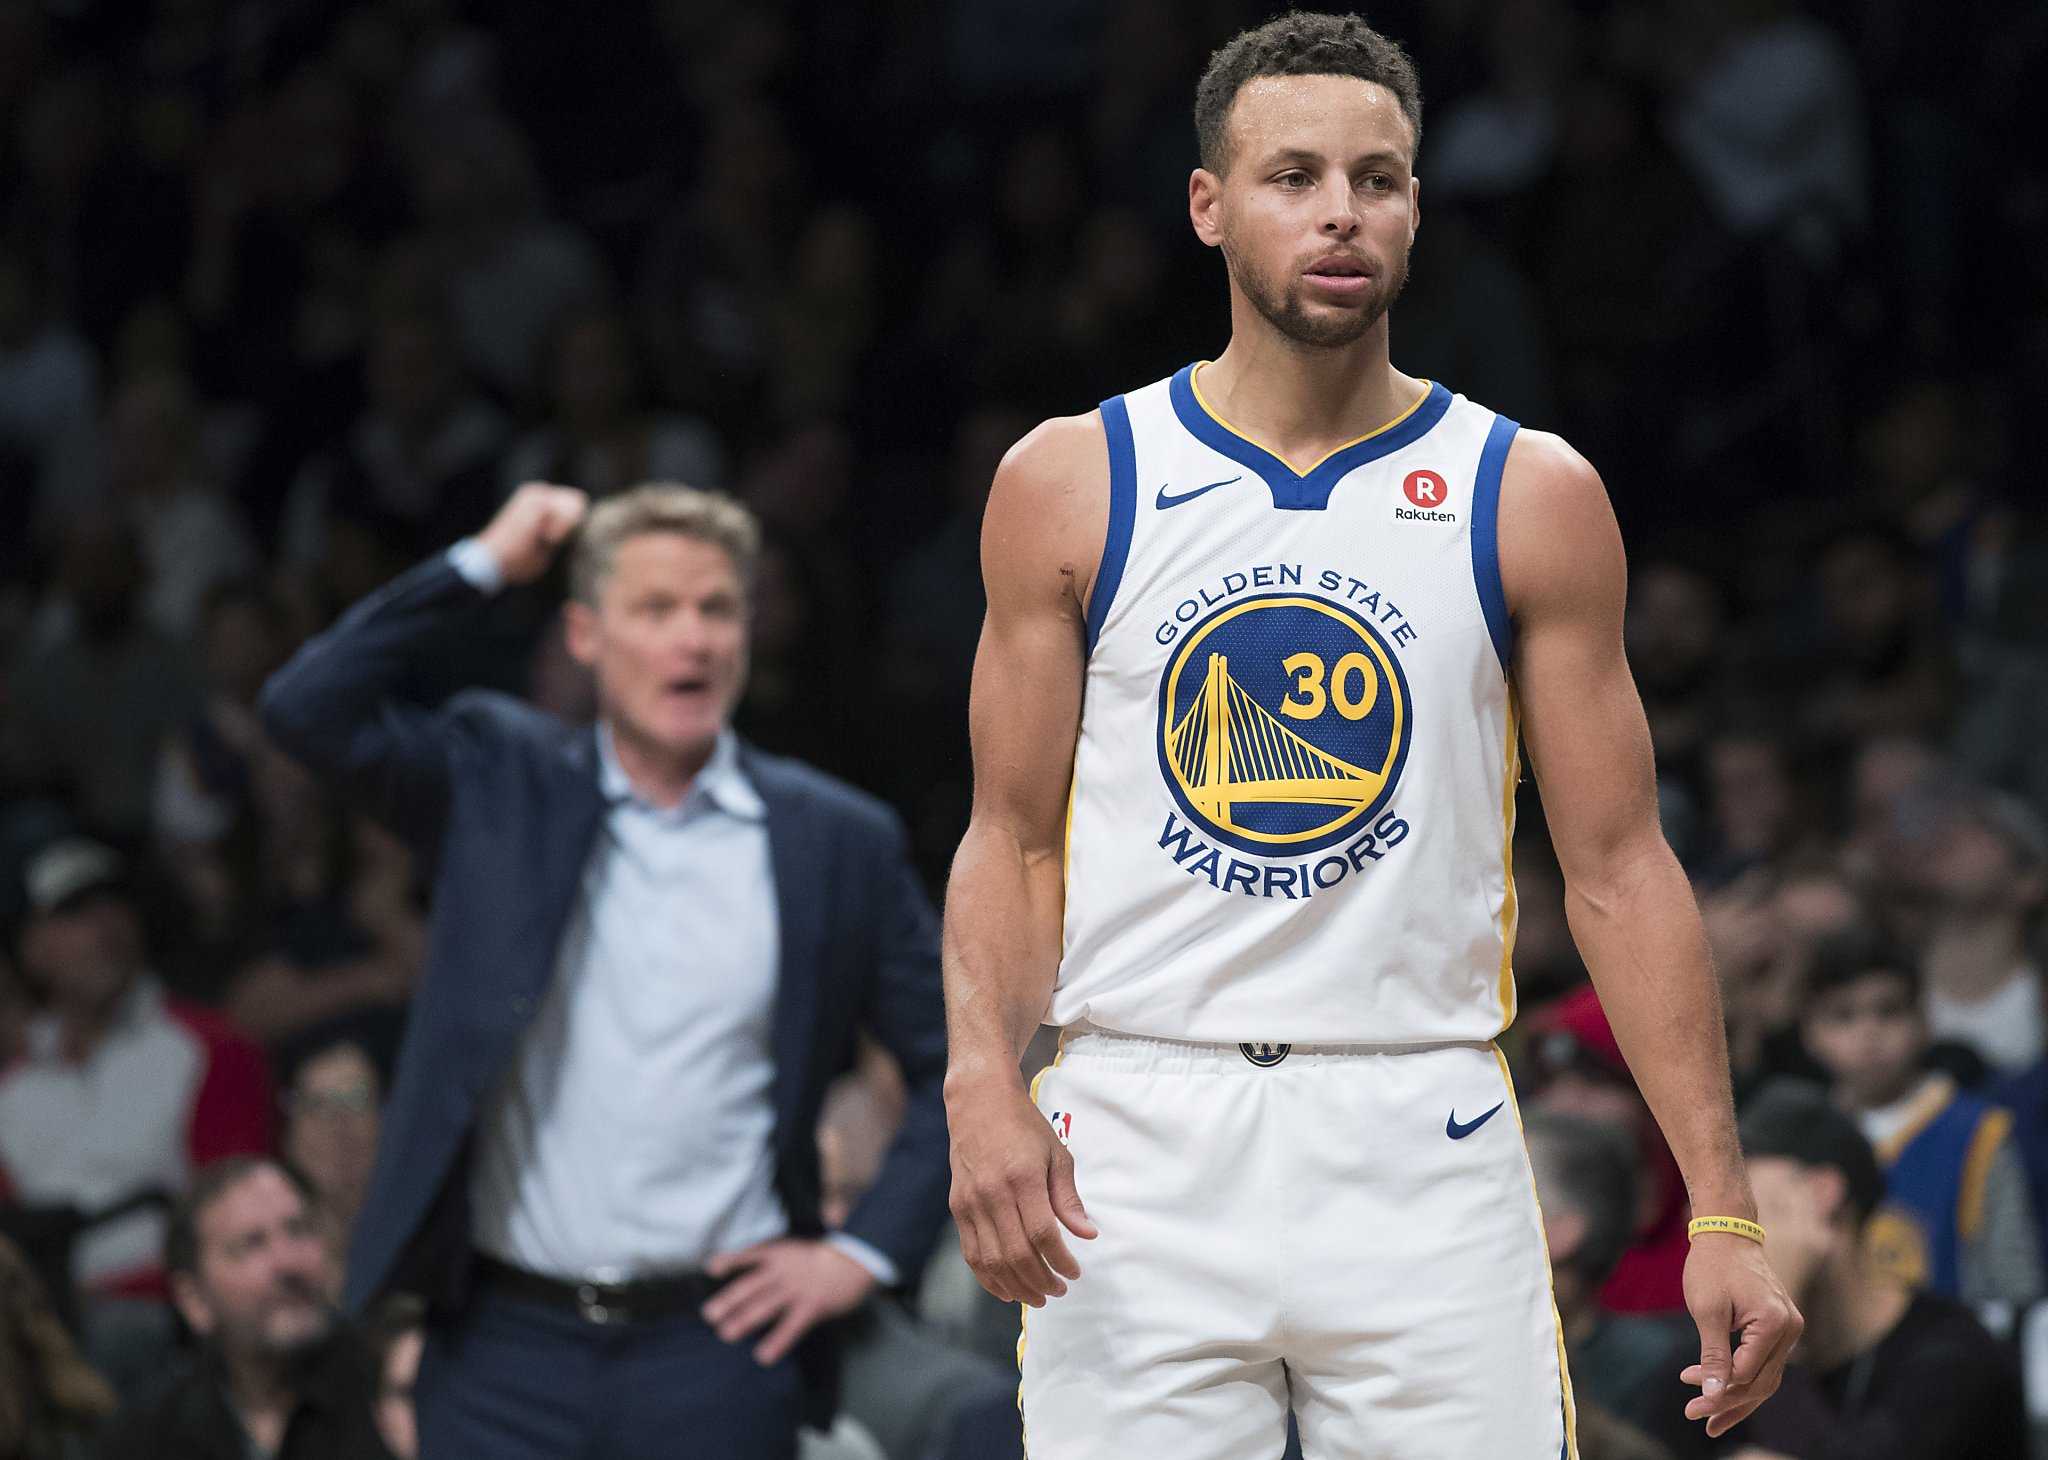 Warriors decide on how to spend time in D.C. in lieu of White House visit